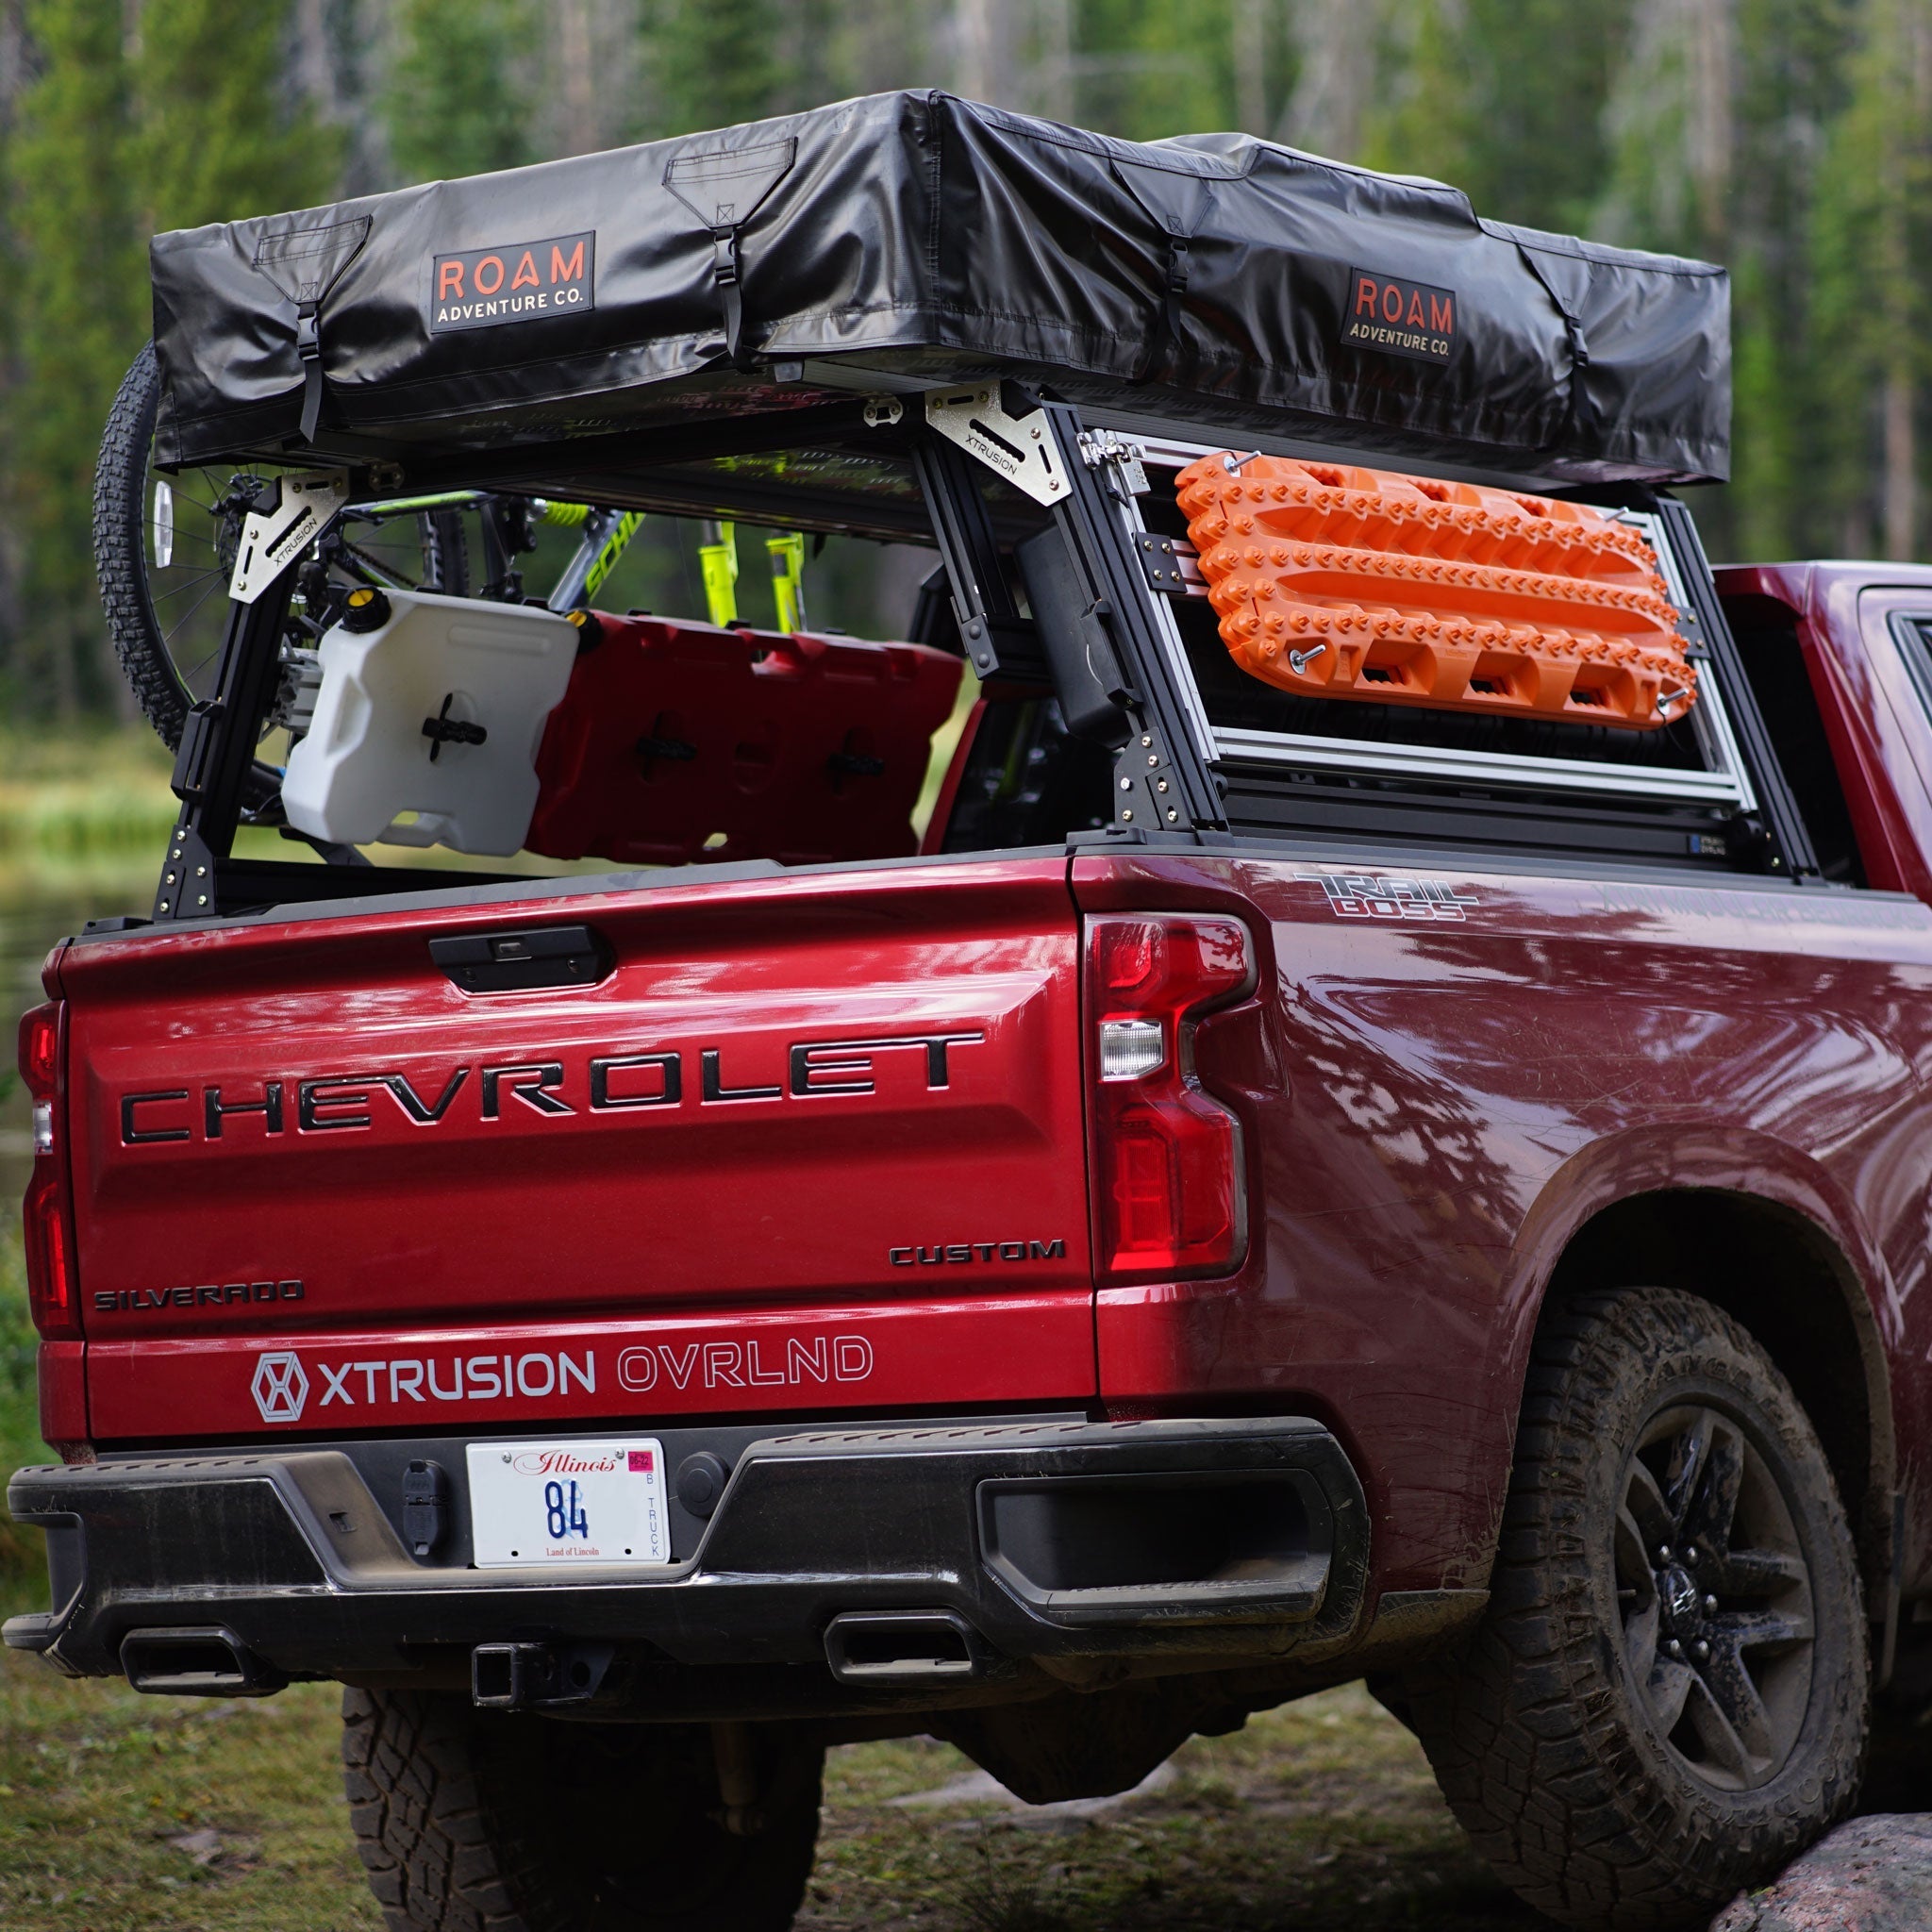 Chevy Silverado Extrusion Overland Bed Rack with traction boards, Rotopax, mountain bike, and roof top tent.